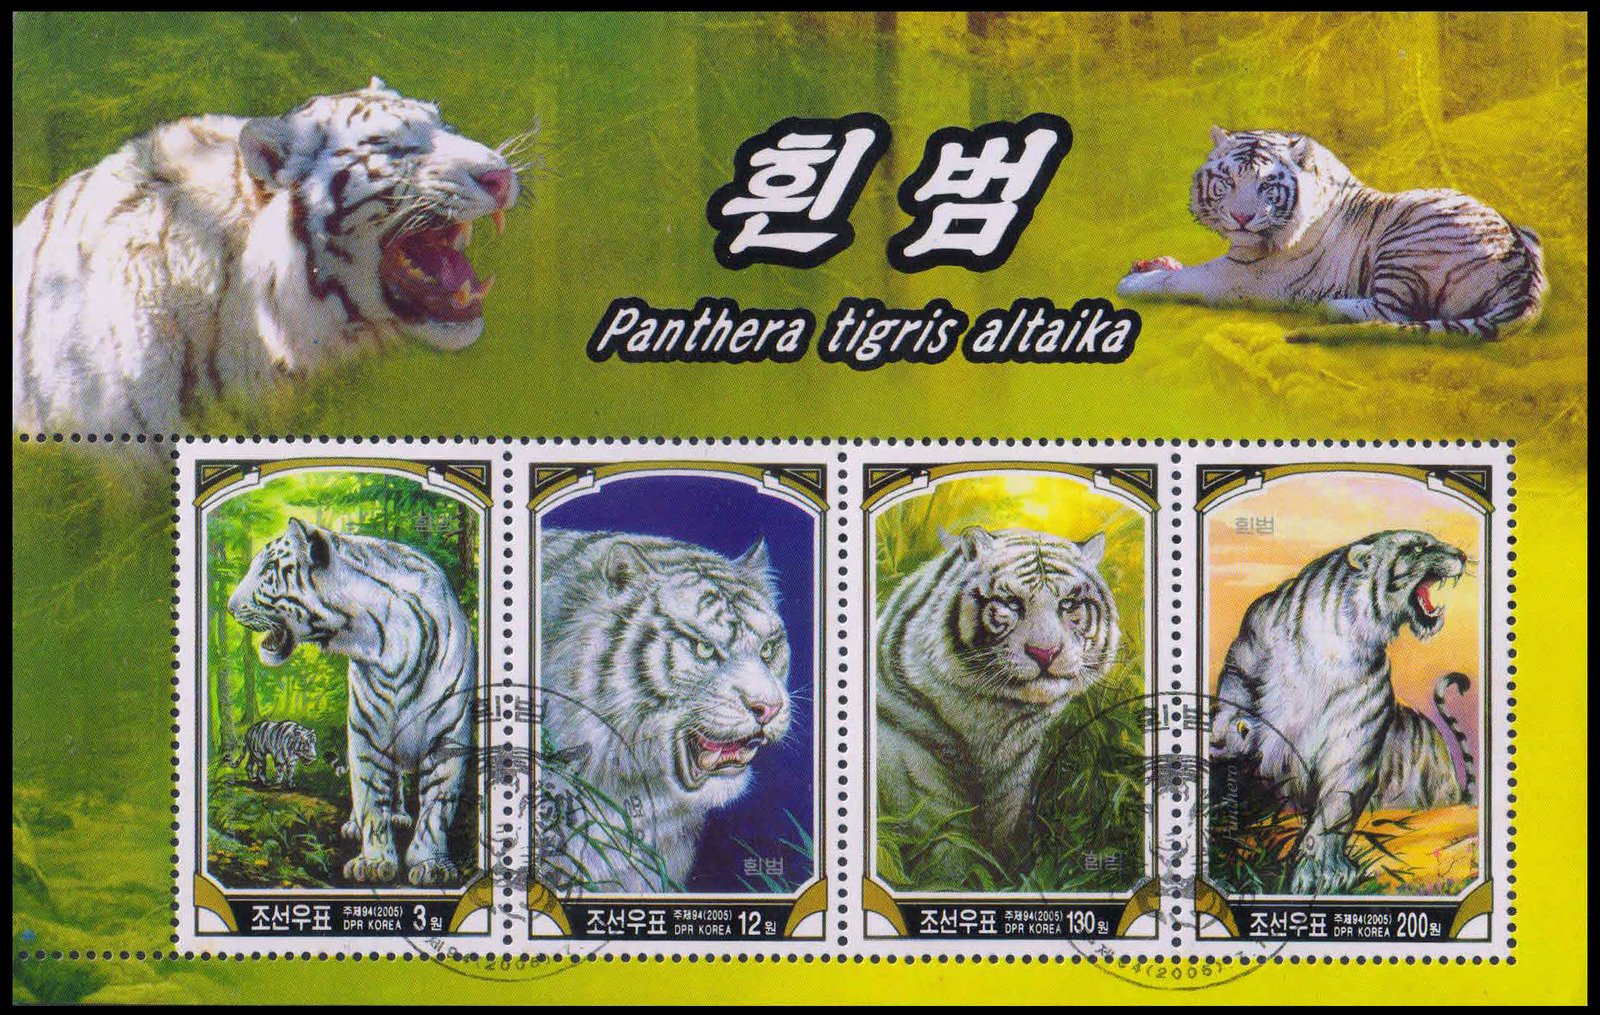 NORTH KOREA 2005-White Tiger, Wildlife, Set of 4 First Day Cancelled, M/S of 4 Stamps, S.G. MS N4525, Cat £ 9.50